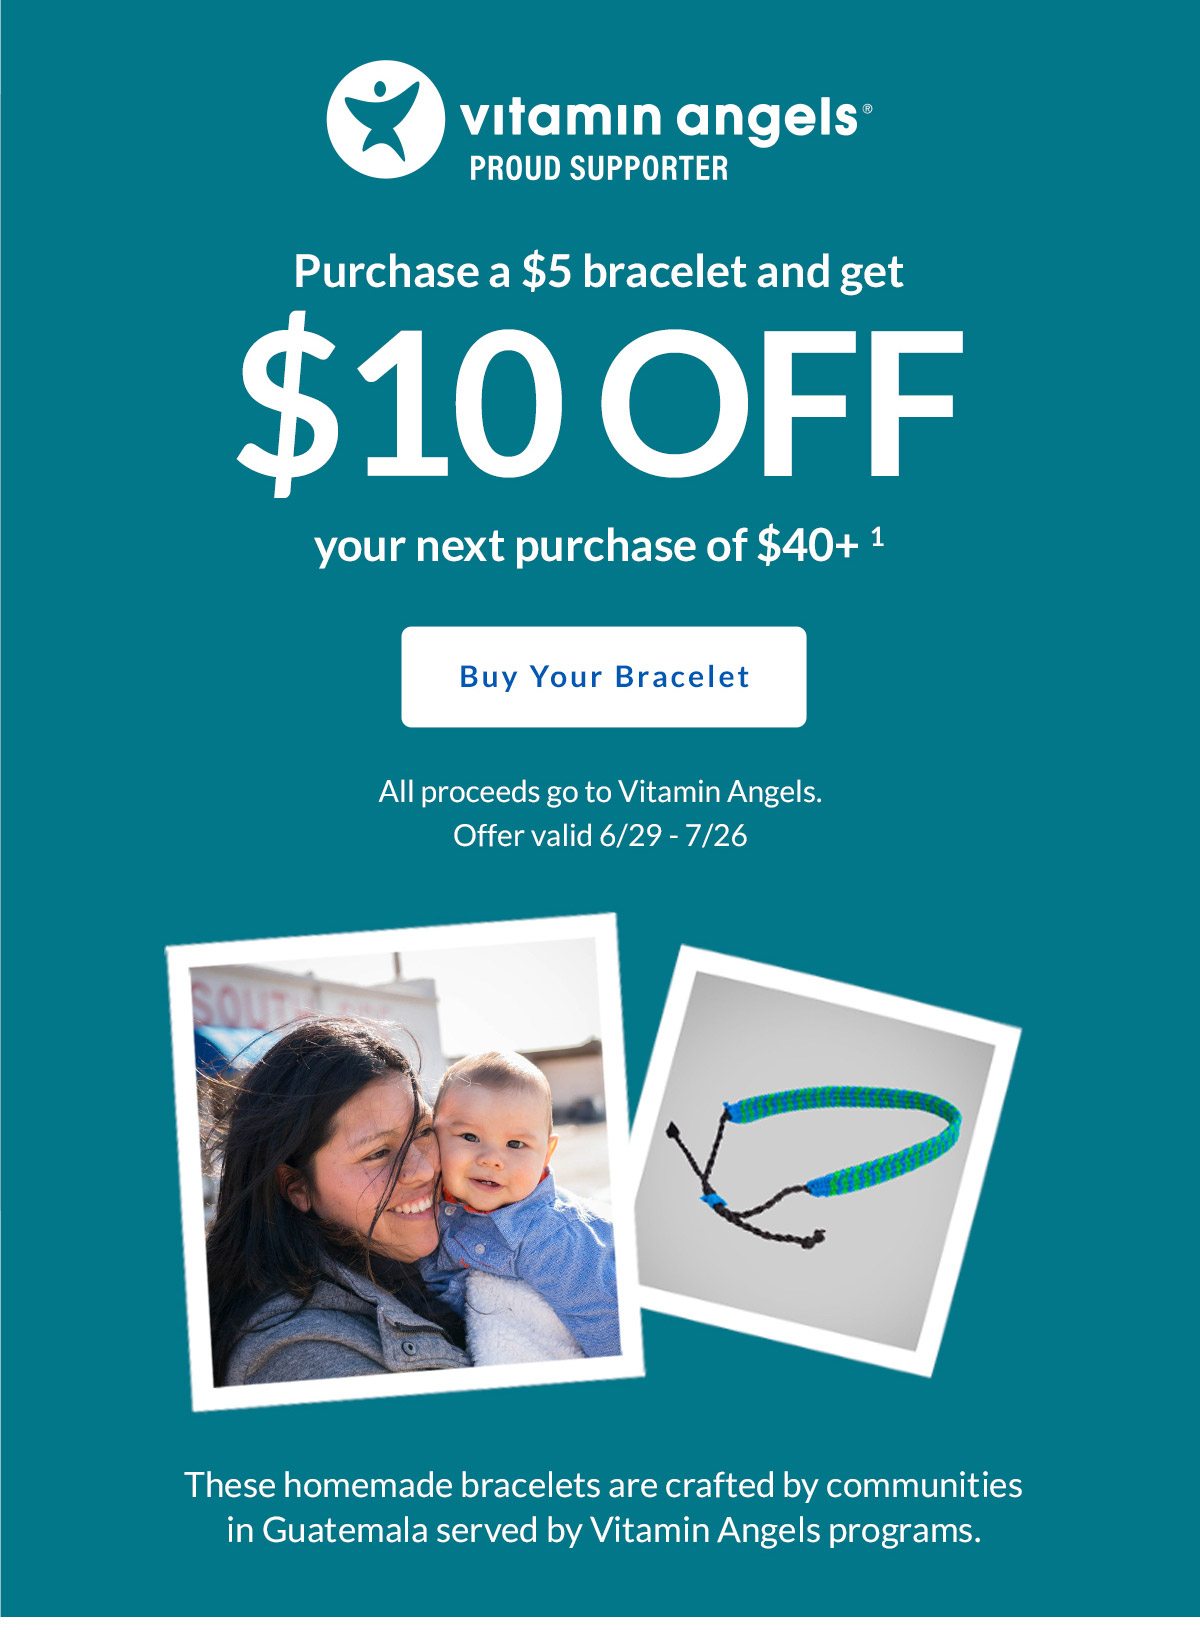 Vitamin Angels Proud Sponsor - Purchase a $5 bracelet and get $10 OFF your next purchase of $40+